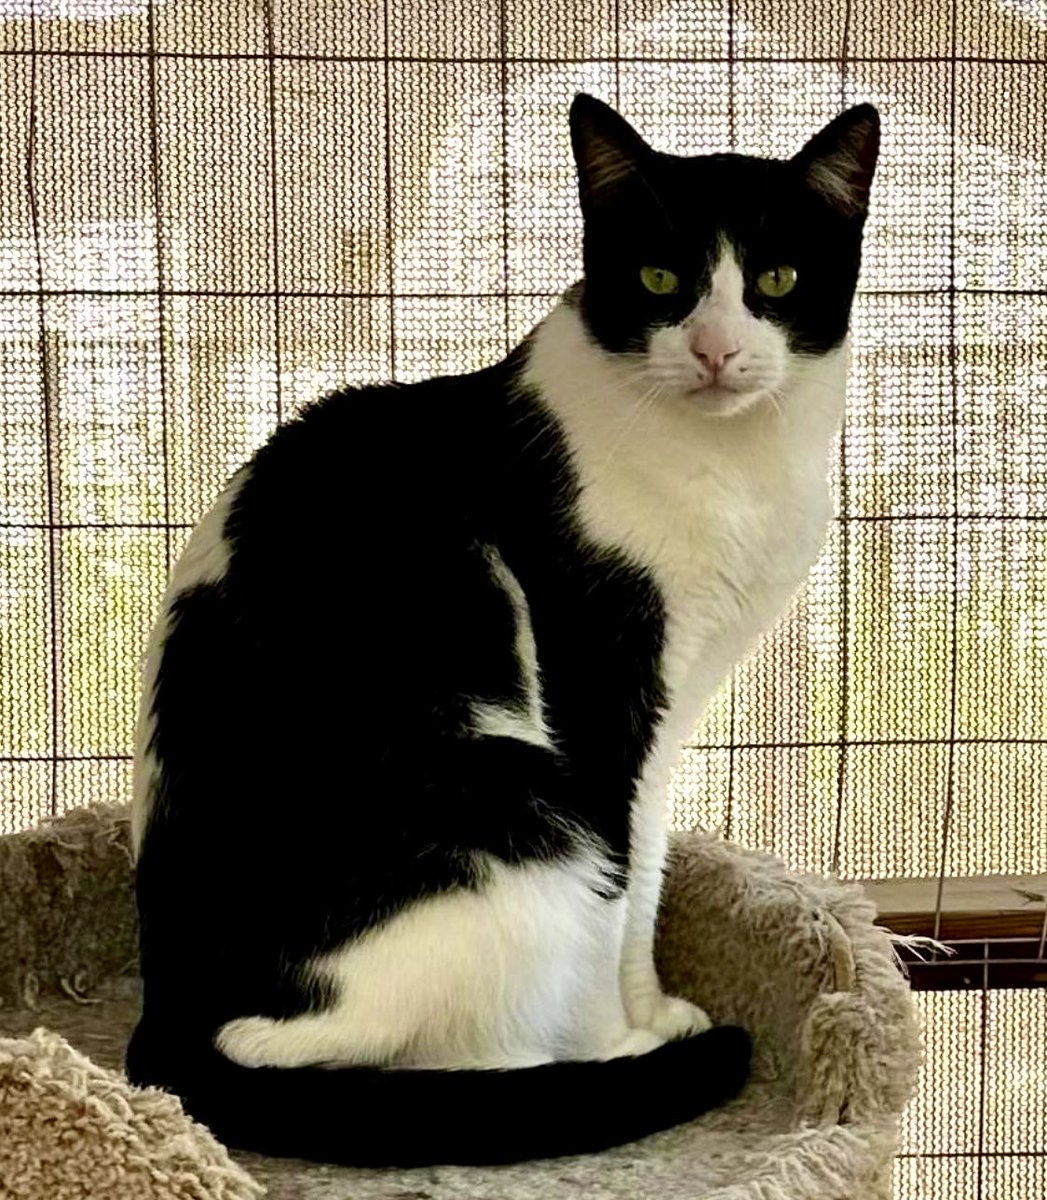 Our sanctuary guy Ollie is a feral-to-friendly work in progress! He’s making great strides learning to trust his volunteer caregivers 🐾 #Cats #Rescue #TNR #SpayAndNeuter